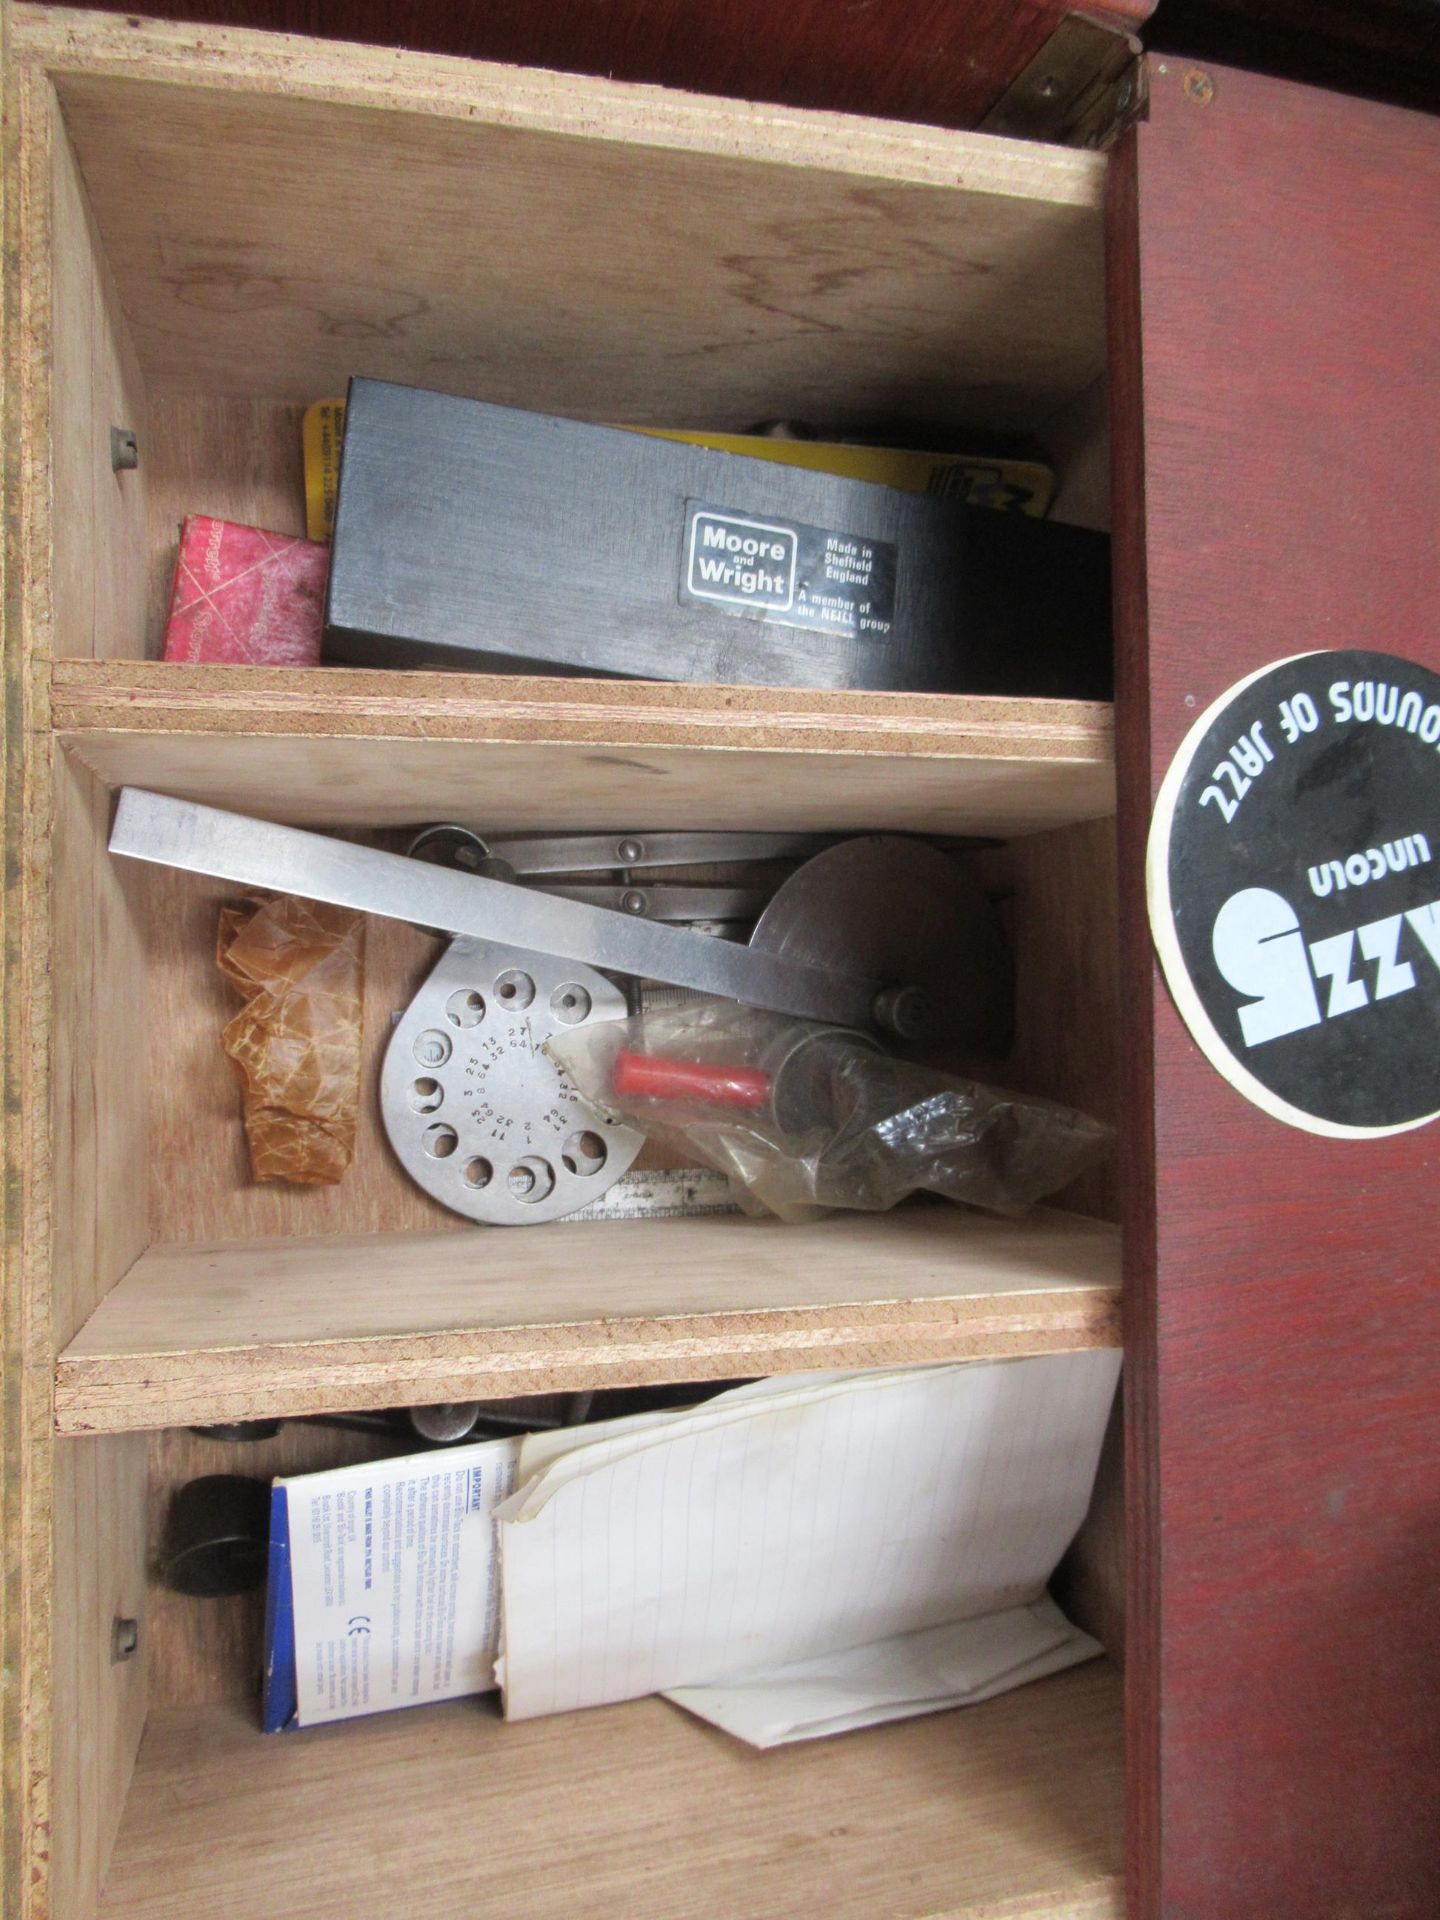 2x wooden storage cabinets and contents of drawers - Image 11 of 22